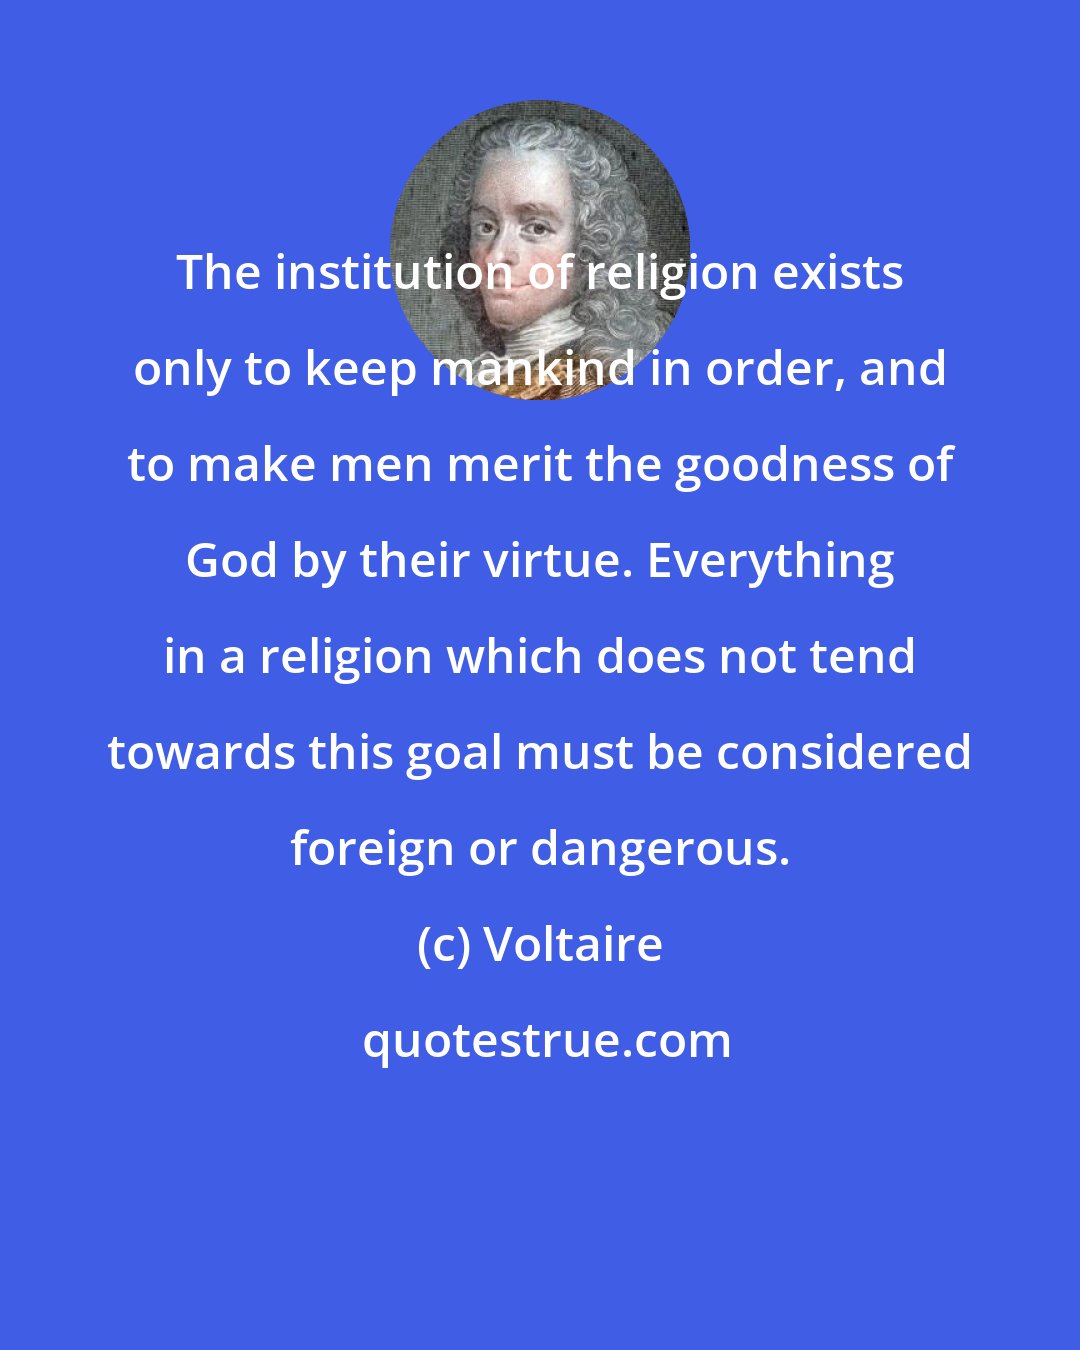 Voltaire: The institution of religion exists only to keep mankind in order, and to make men merit the goodness of God by their virtue. Everything in a religion which does not tend towards this goal must be considered foreign or dangerous.